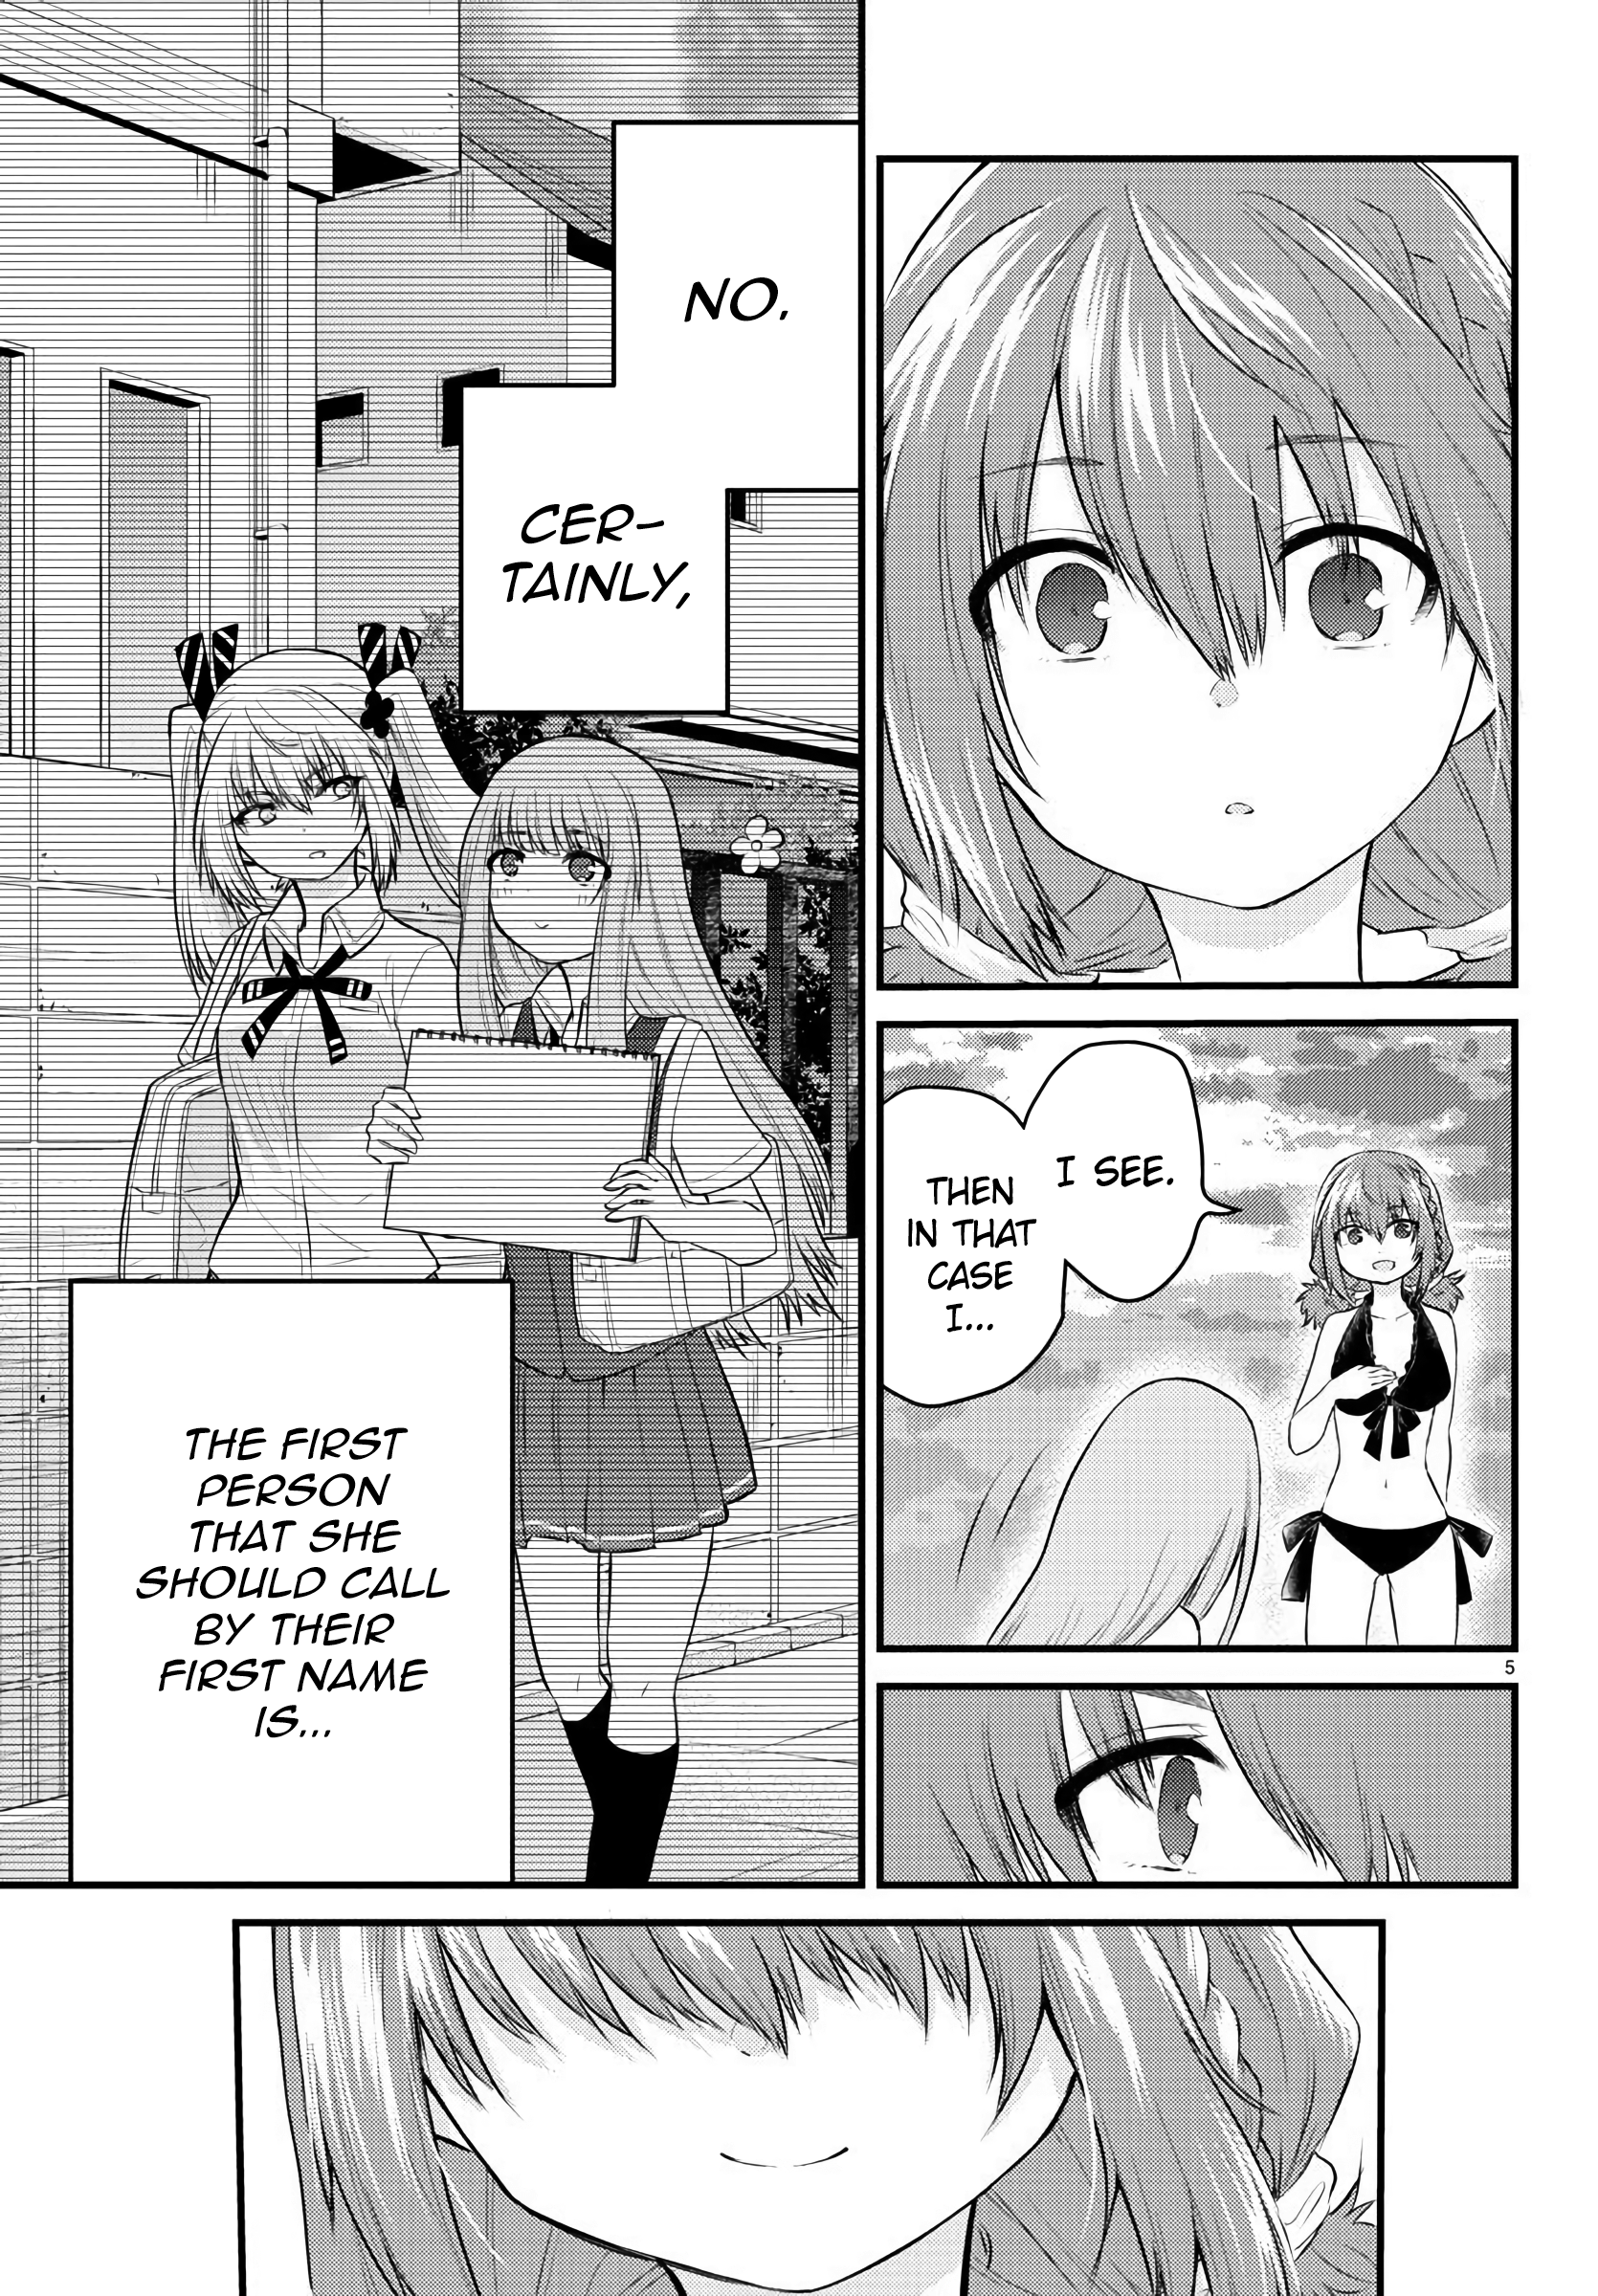 The Mute Girl And Her New Friend Vol.2 Chapter 20